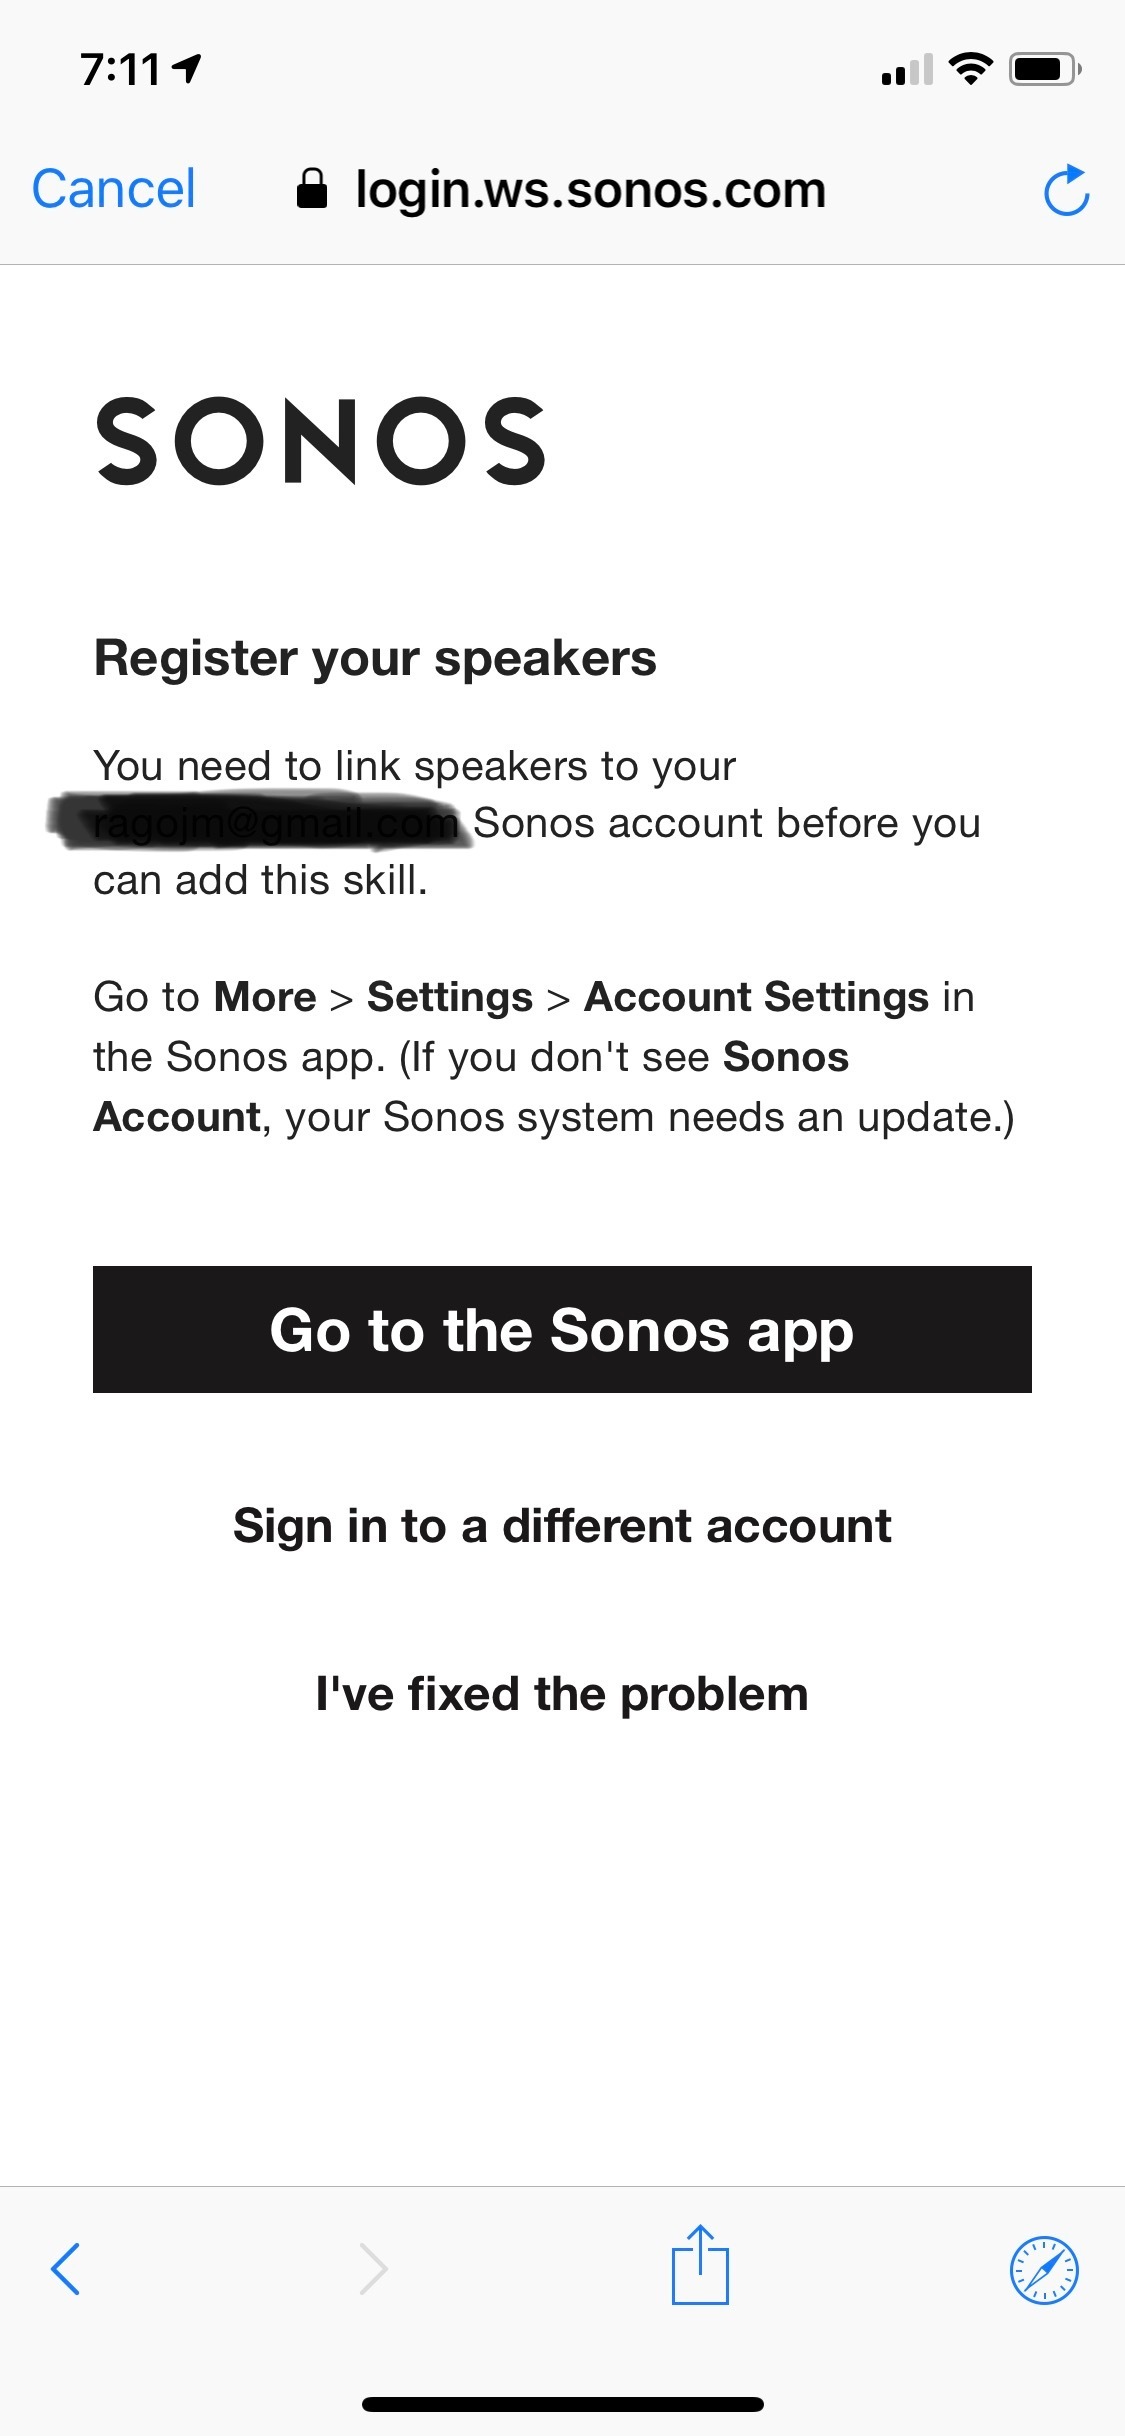 pair google home with sonos